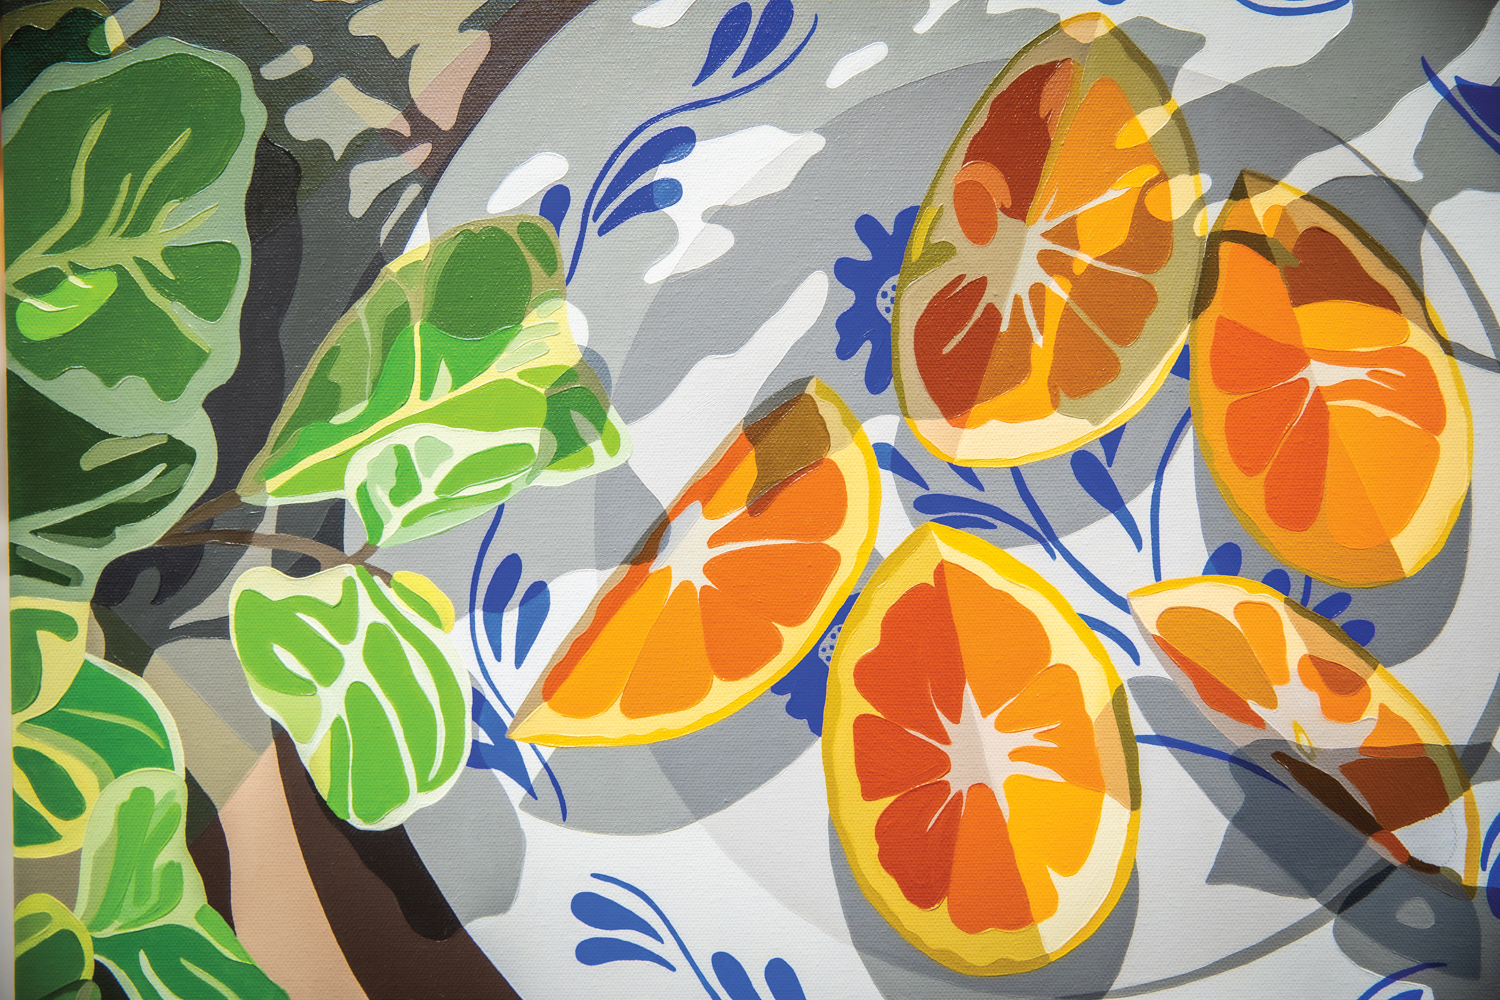 oil painting by Natalia Juncadella of oranges on a blue plate in shadows